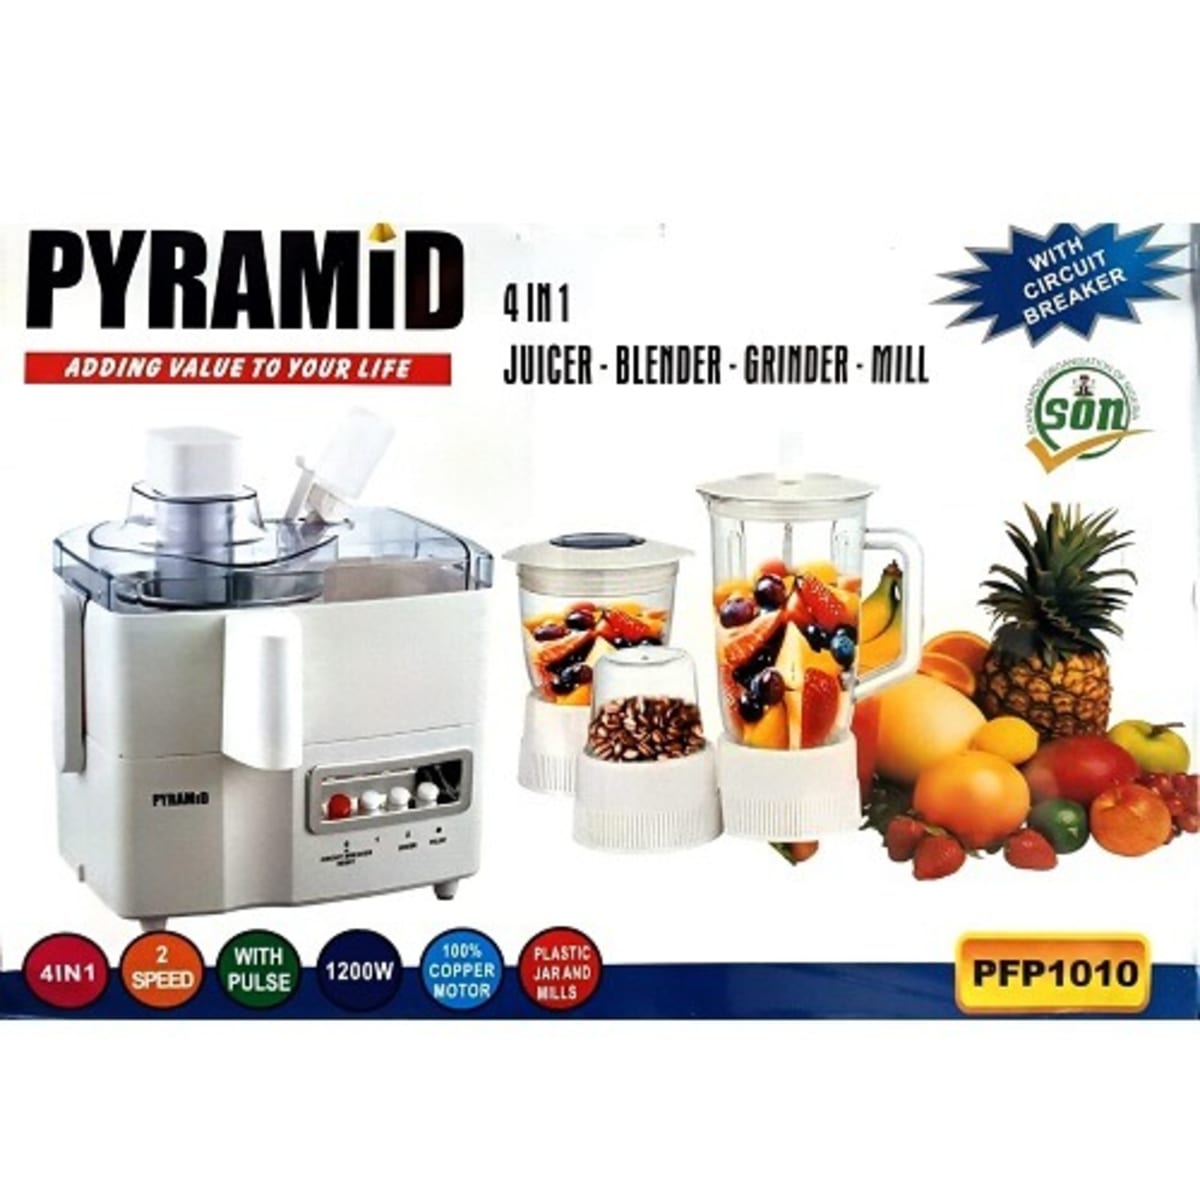 Pyramid 4 In 1 Juicer, Blender, Grinder And Mill - 600W